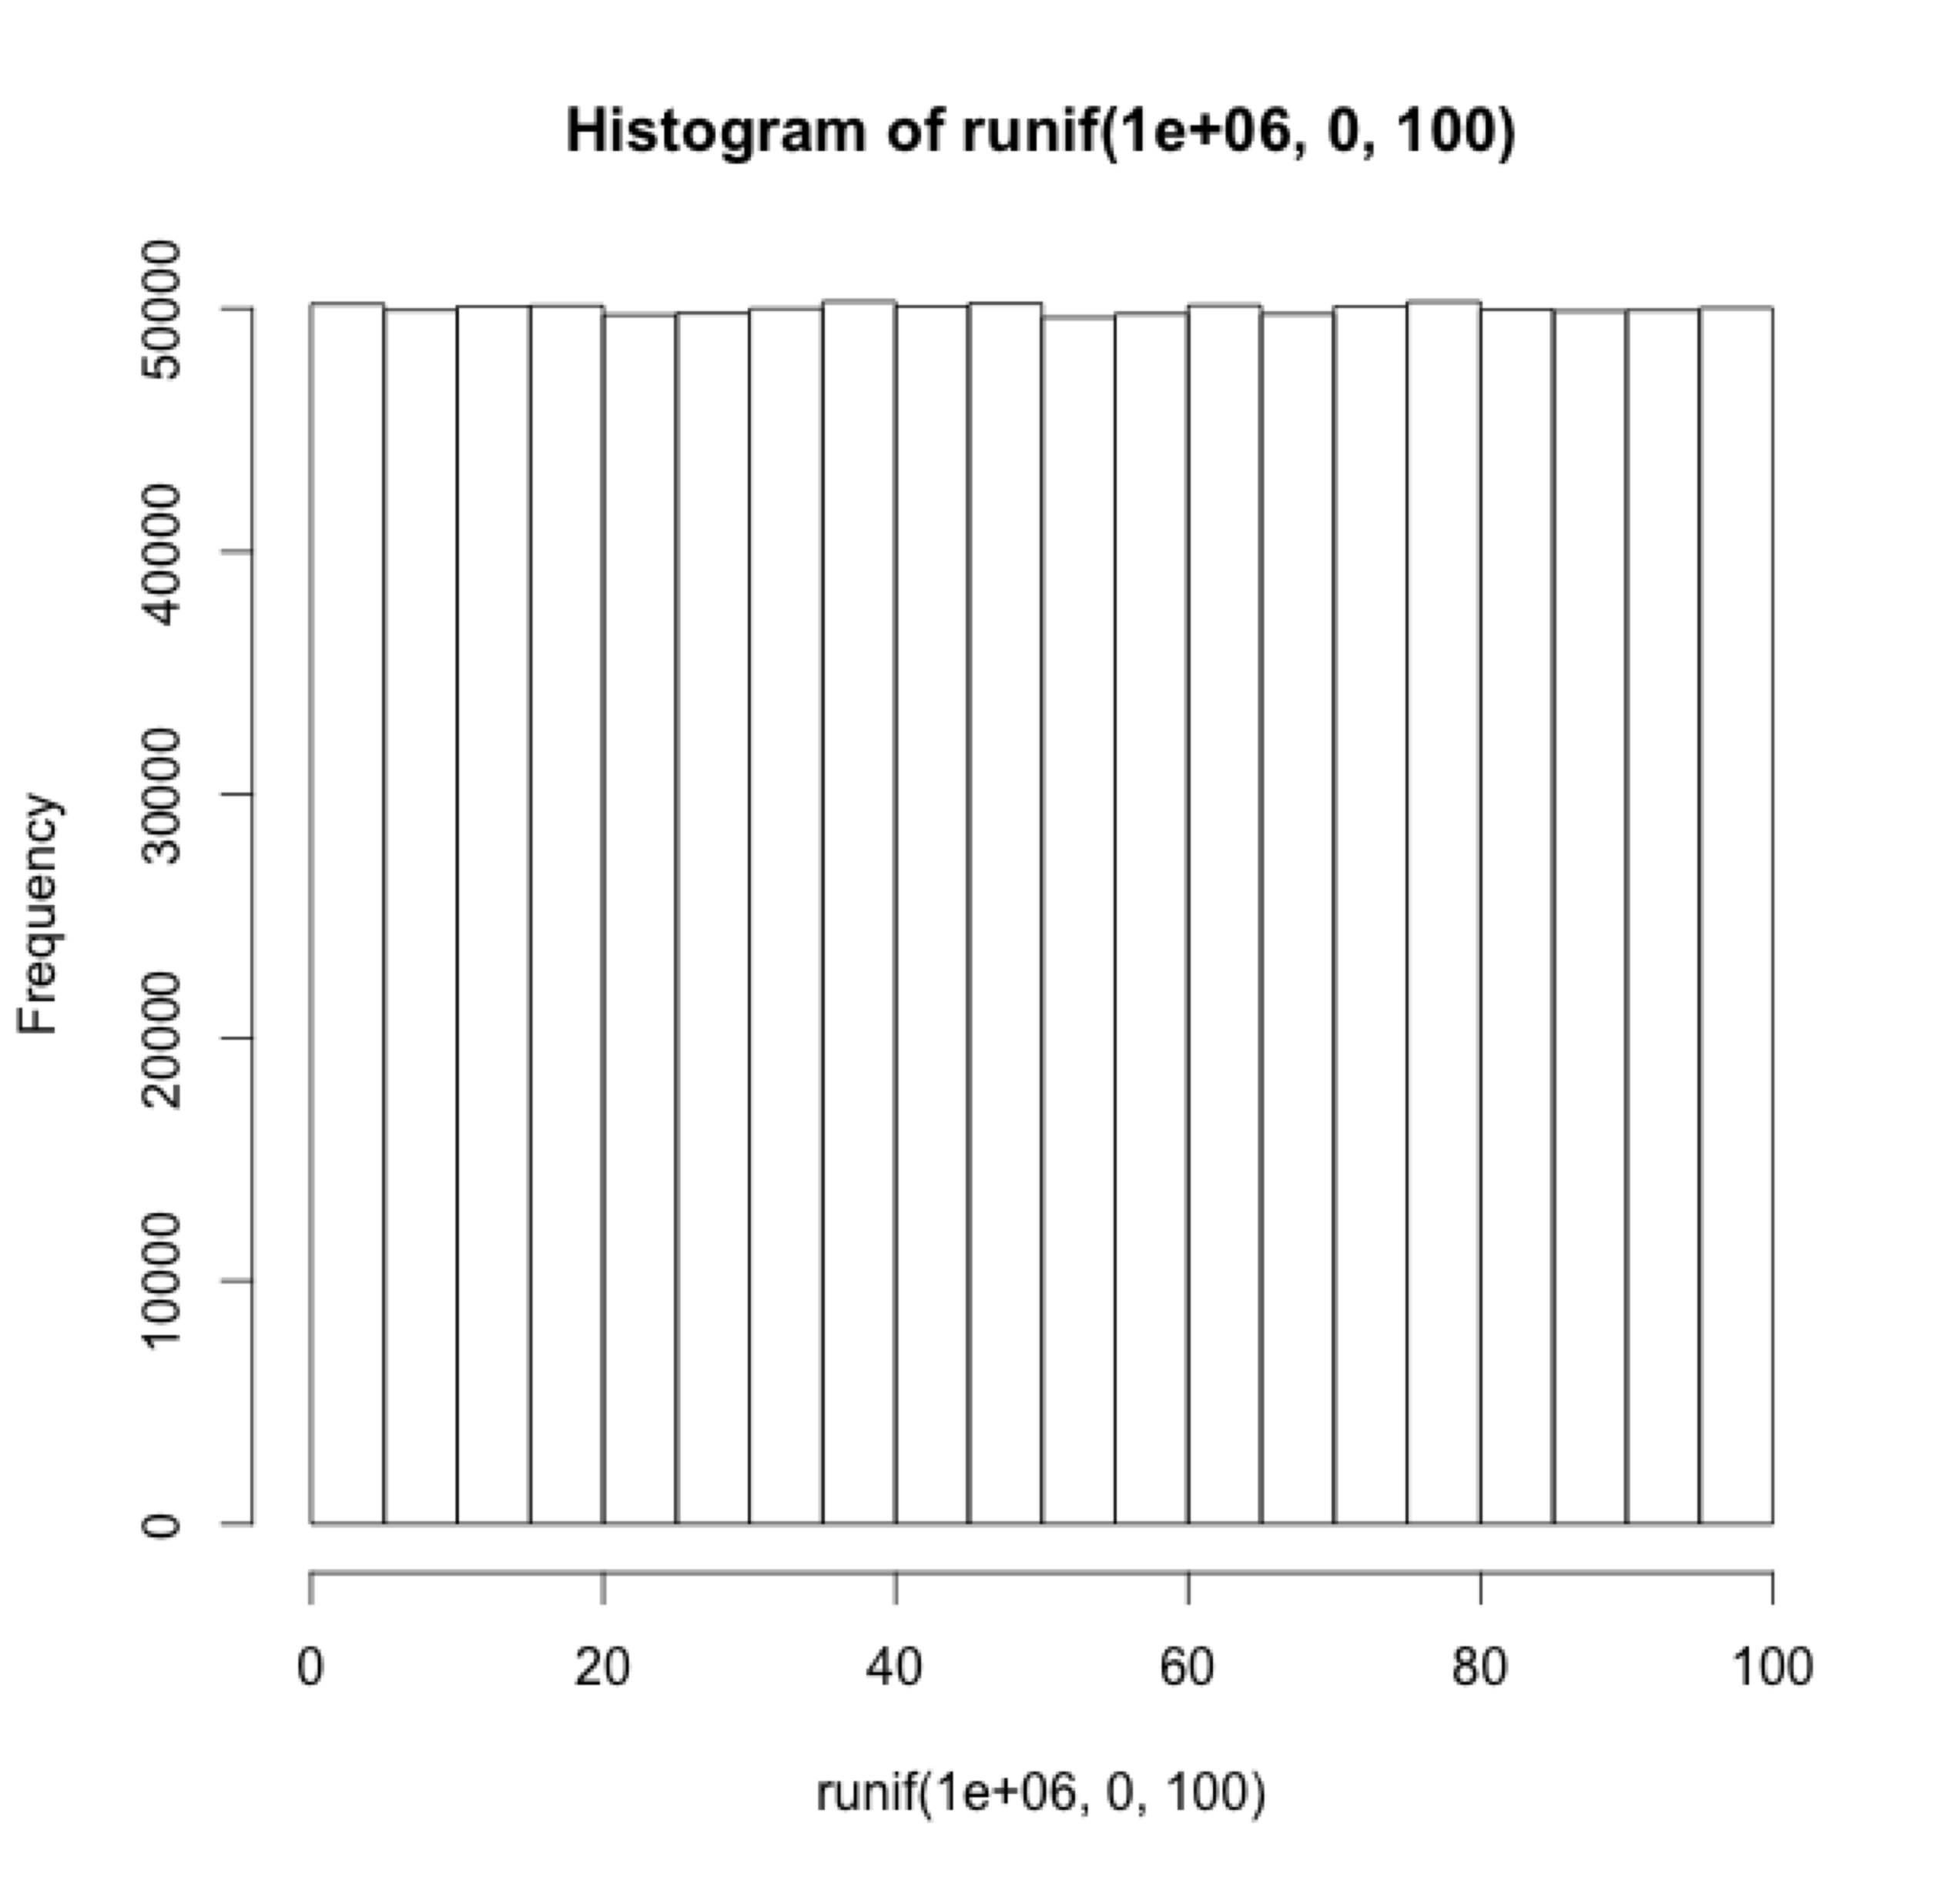 Histogram showing sampled data from a uniform distribution